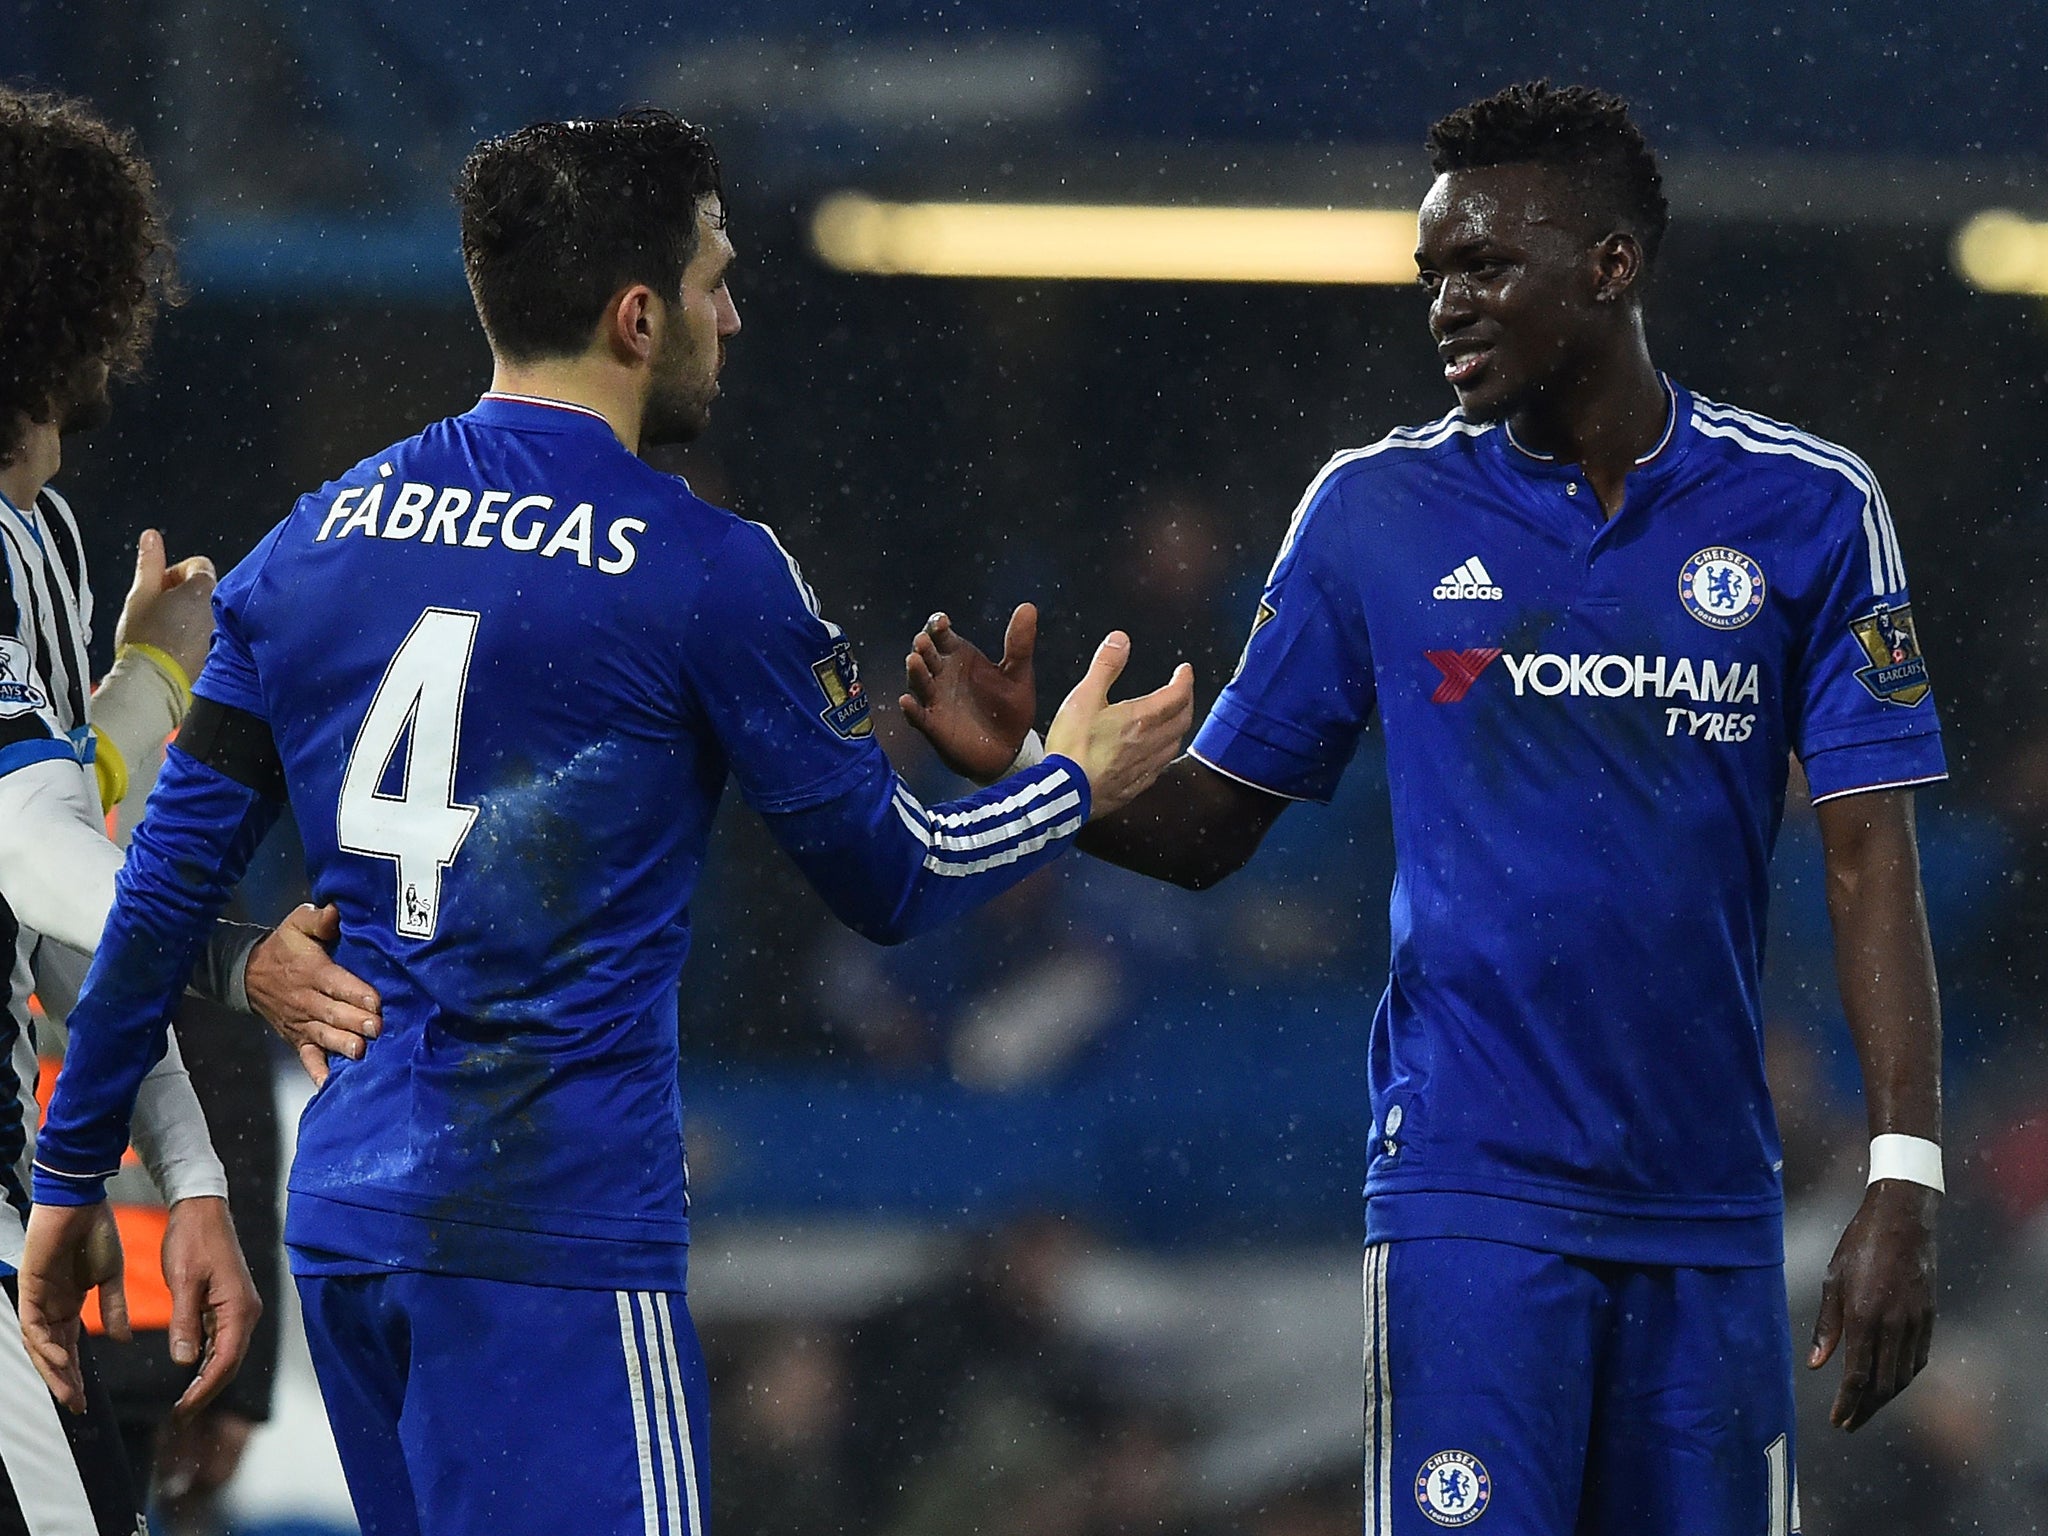 &#13;
Bertrand Traore (right) has scored in each of his last three games&#13;